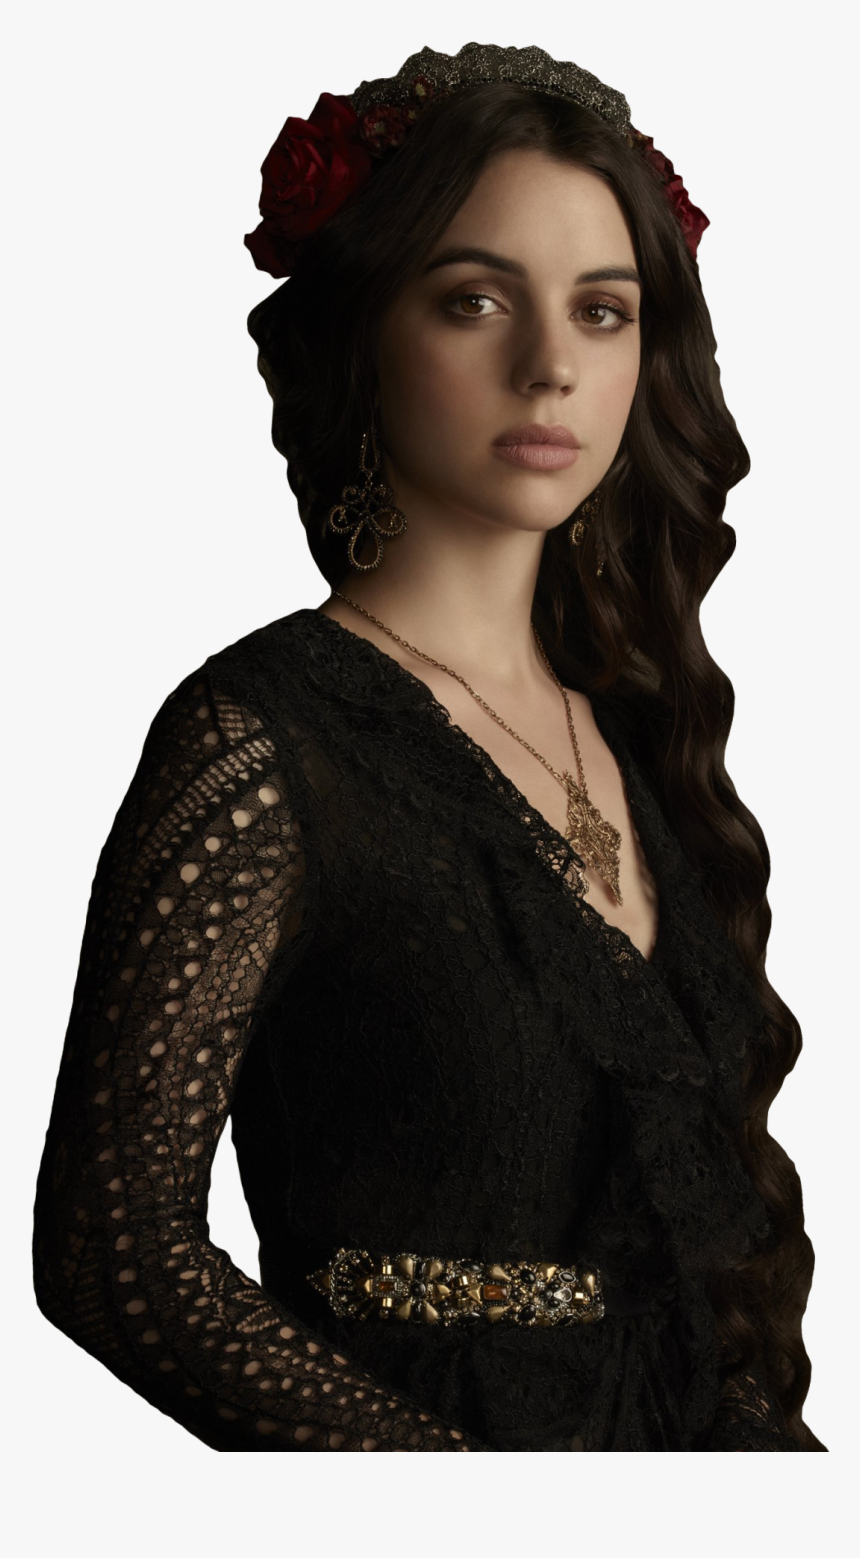 Mary Stuart Reign Png , Png Download - Reign Mary Stuart Png, Transparent Png, Free Download